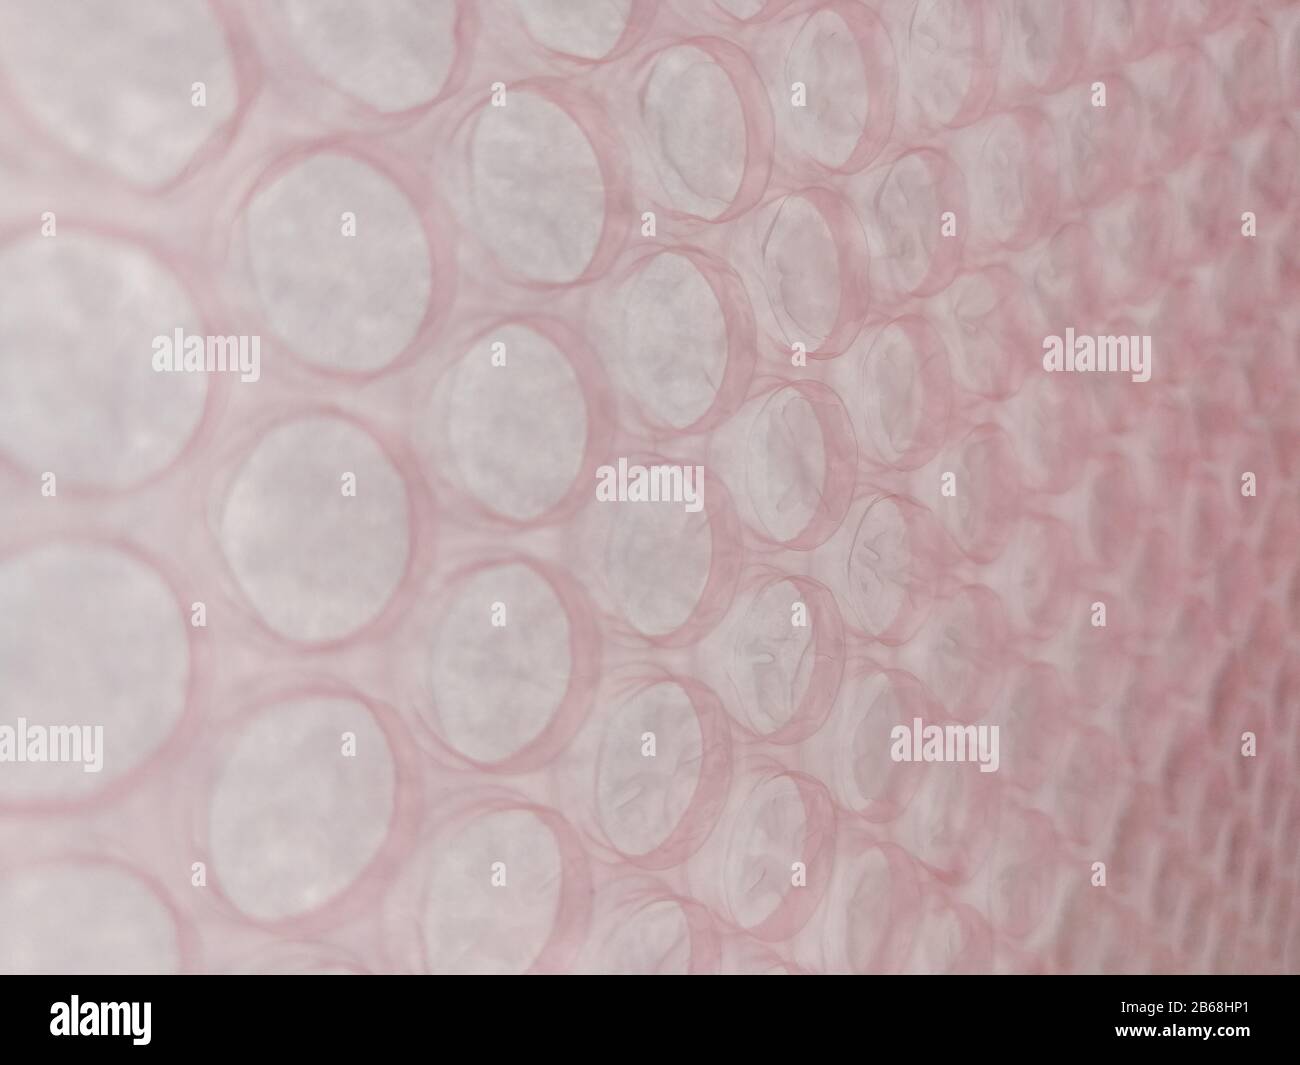 Pink bubble wrap close up for packing fragile things Stock Photo